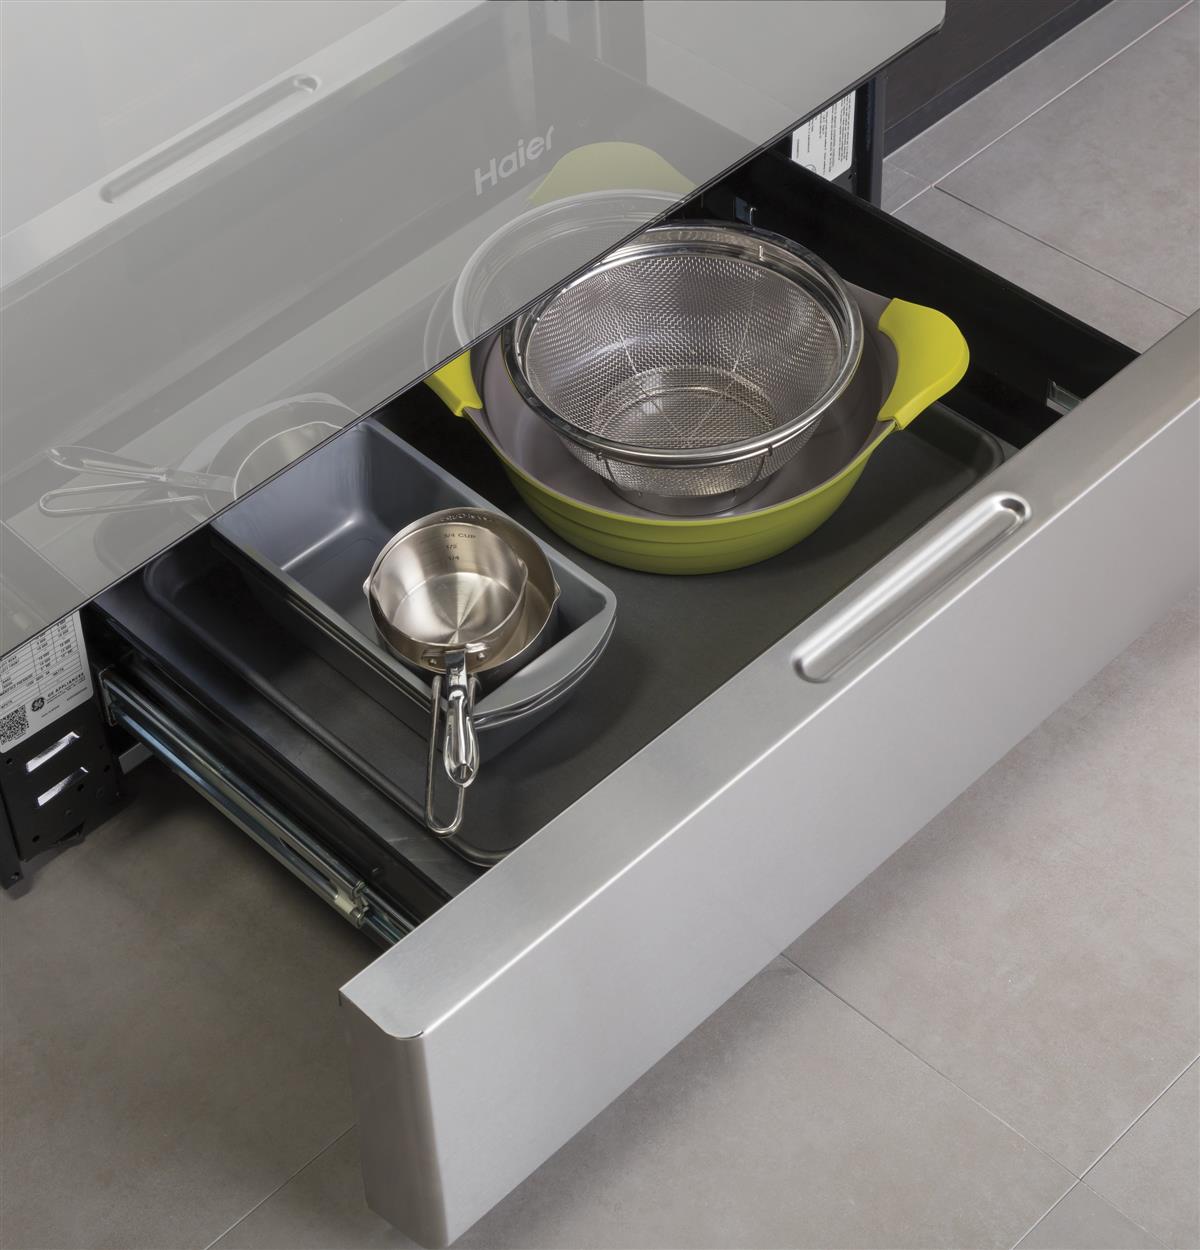 Removable, Full-width Storage Drawer